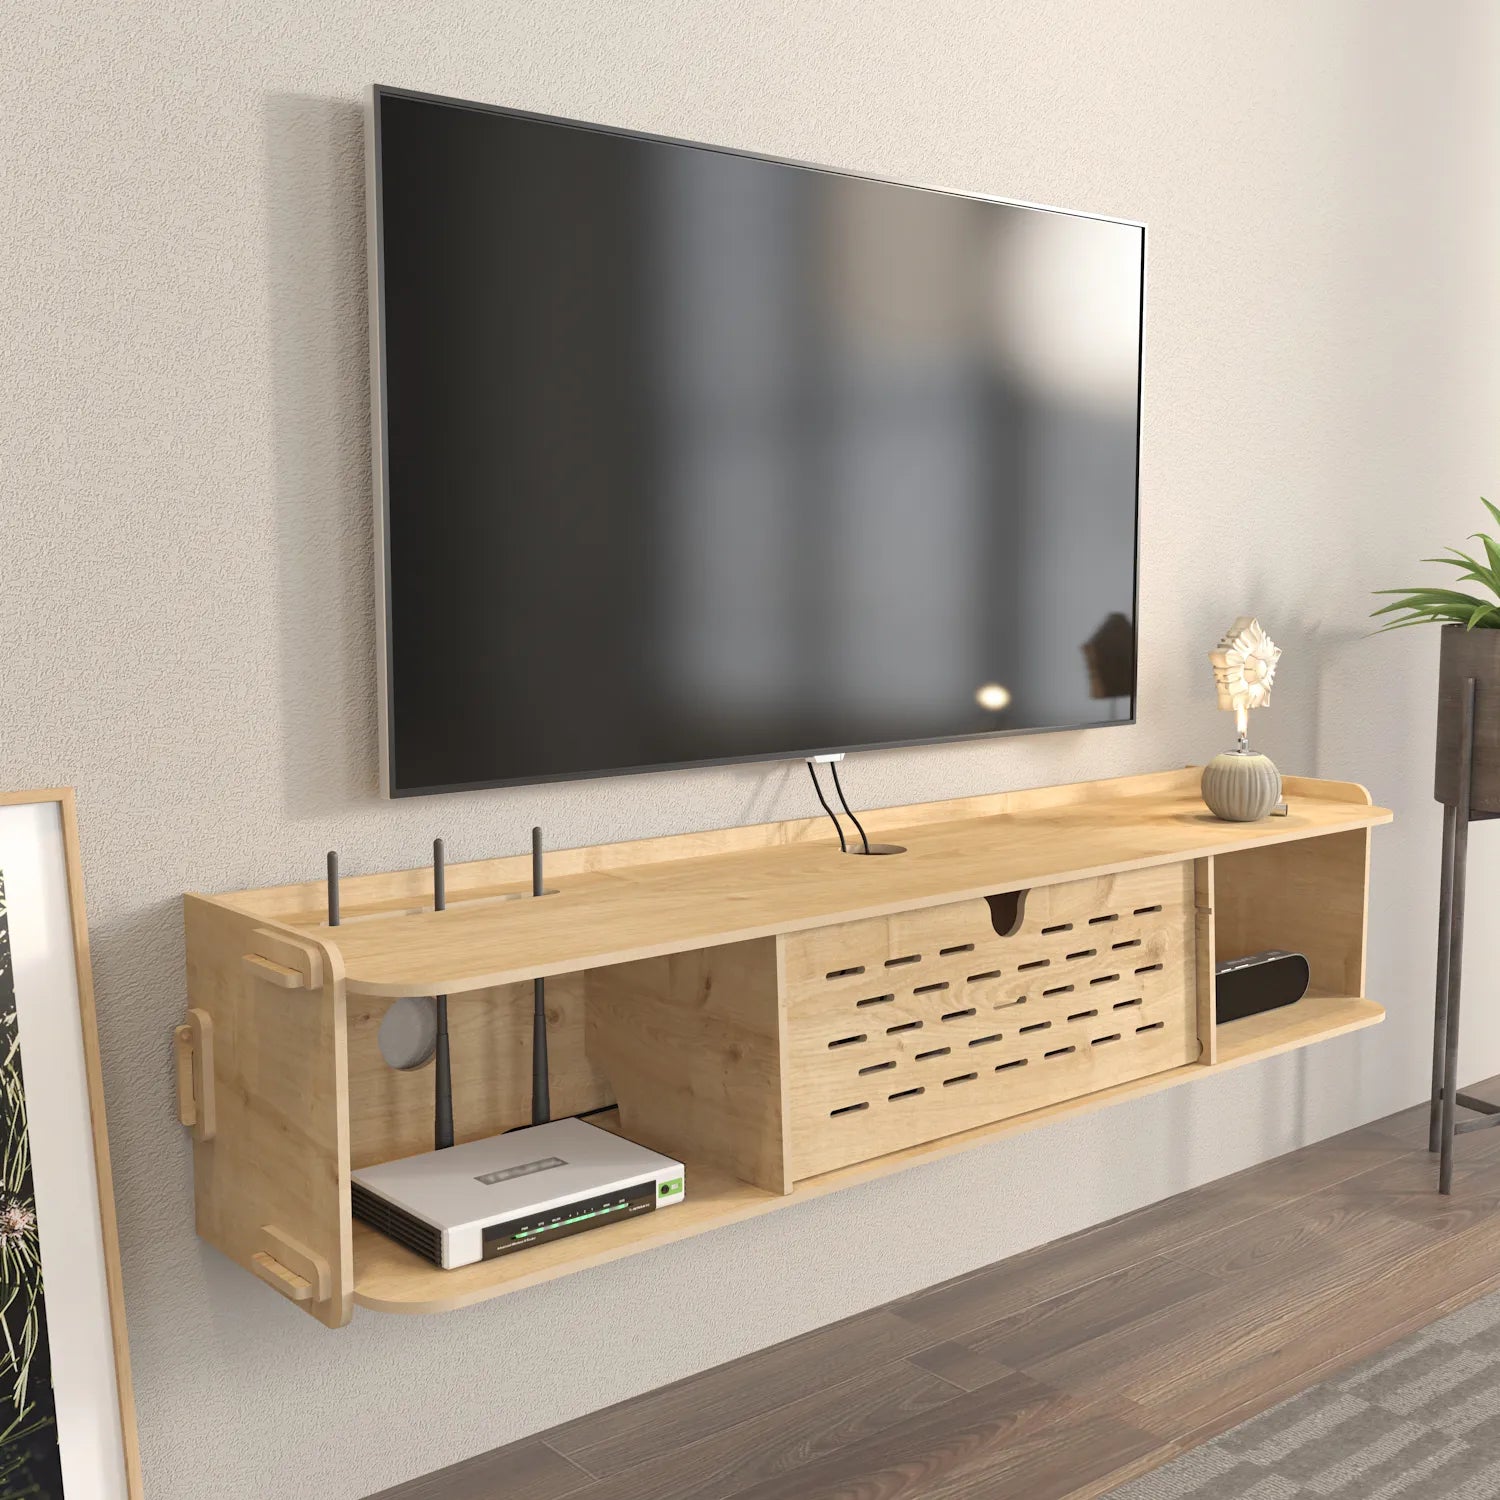 Sima 46" Wide Floating TV Stand and Media Console